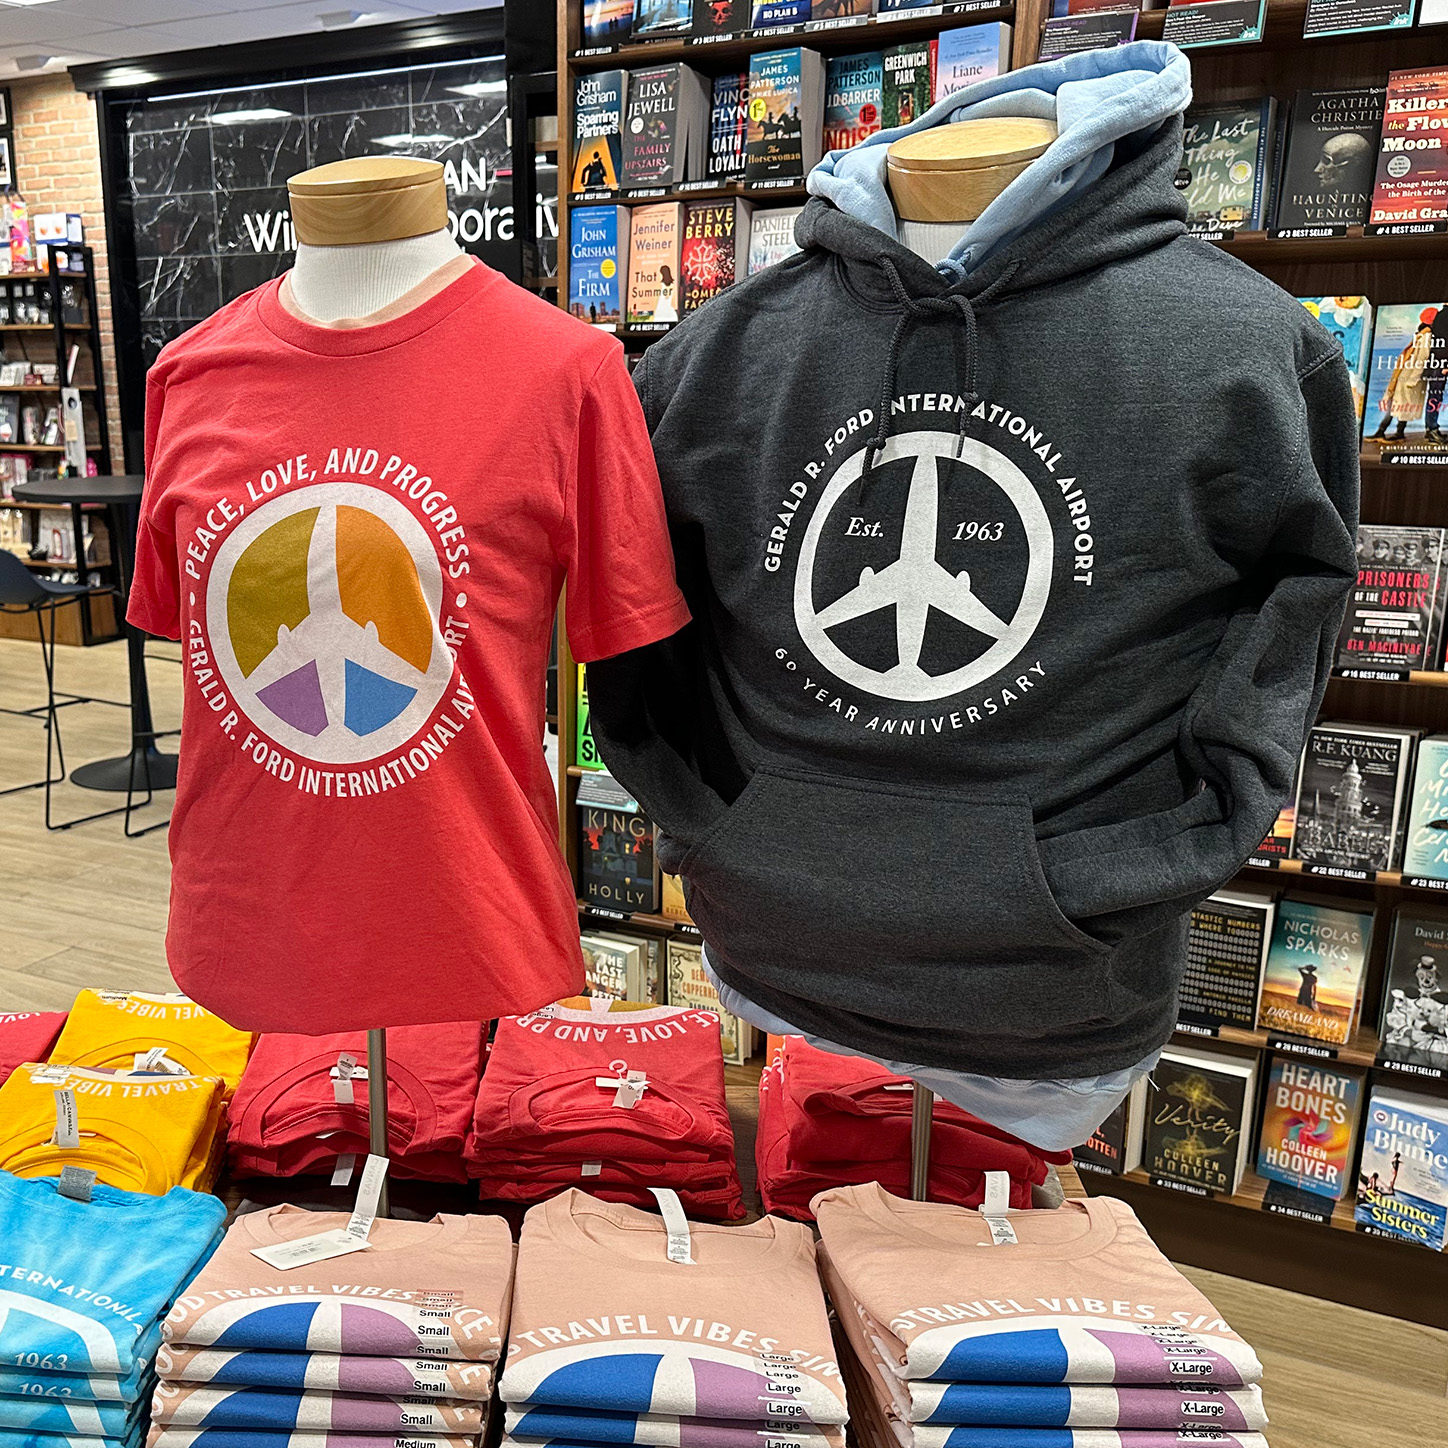 Merchandise for sale at the airport store